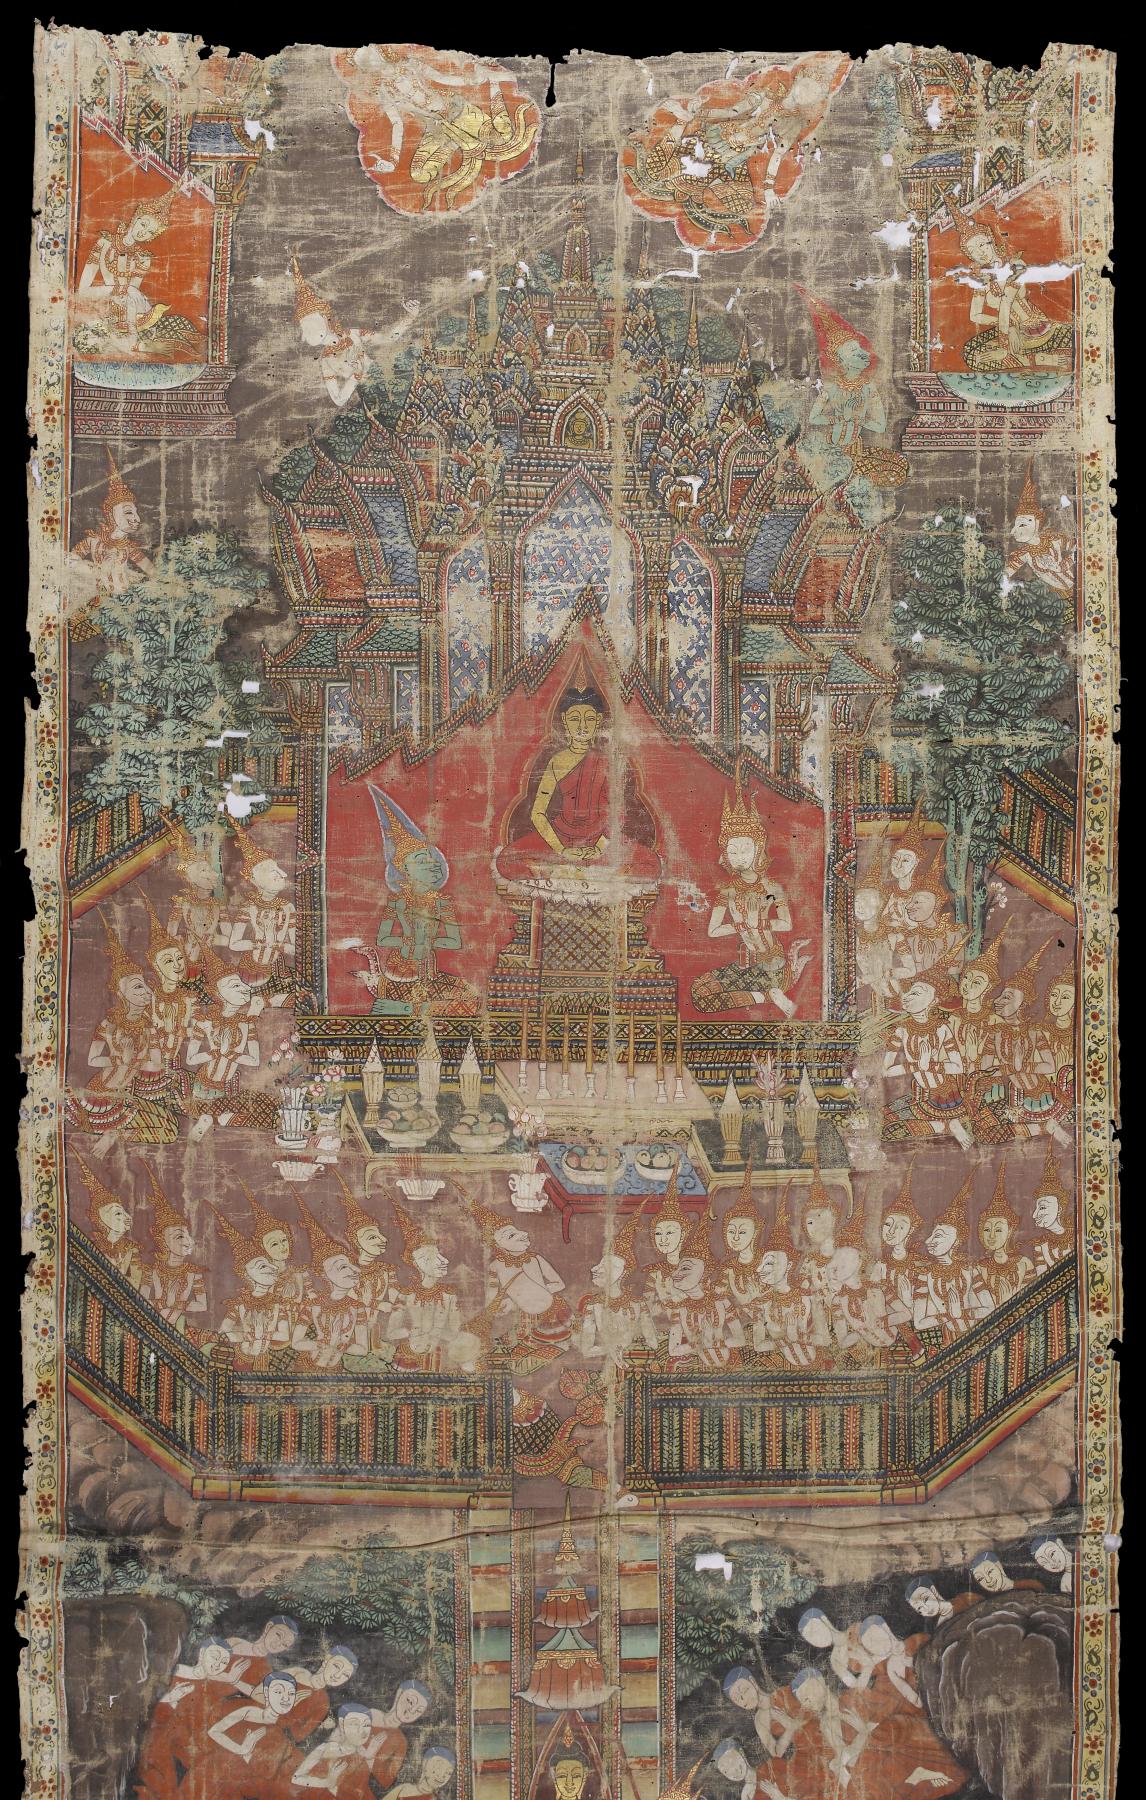 Image for Scenes from the Life of the Buddha with the Buddha's Descent at Center